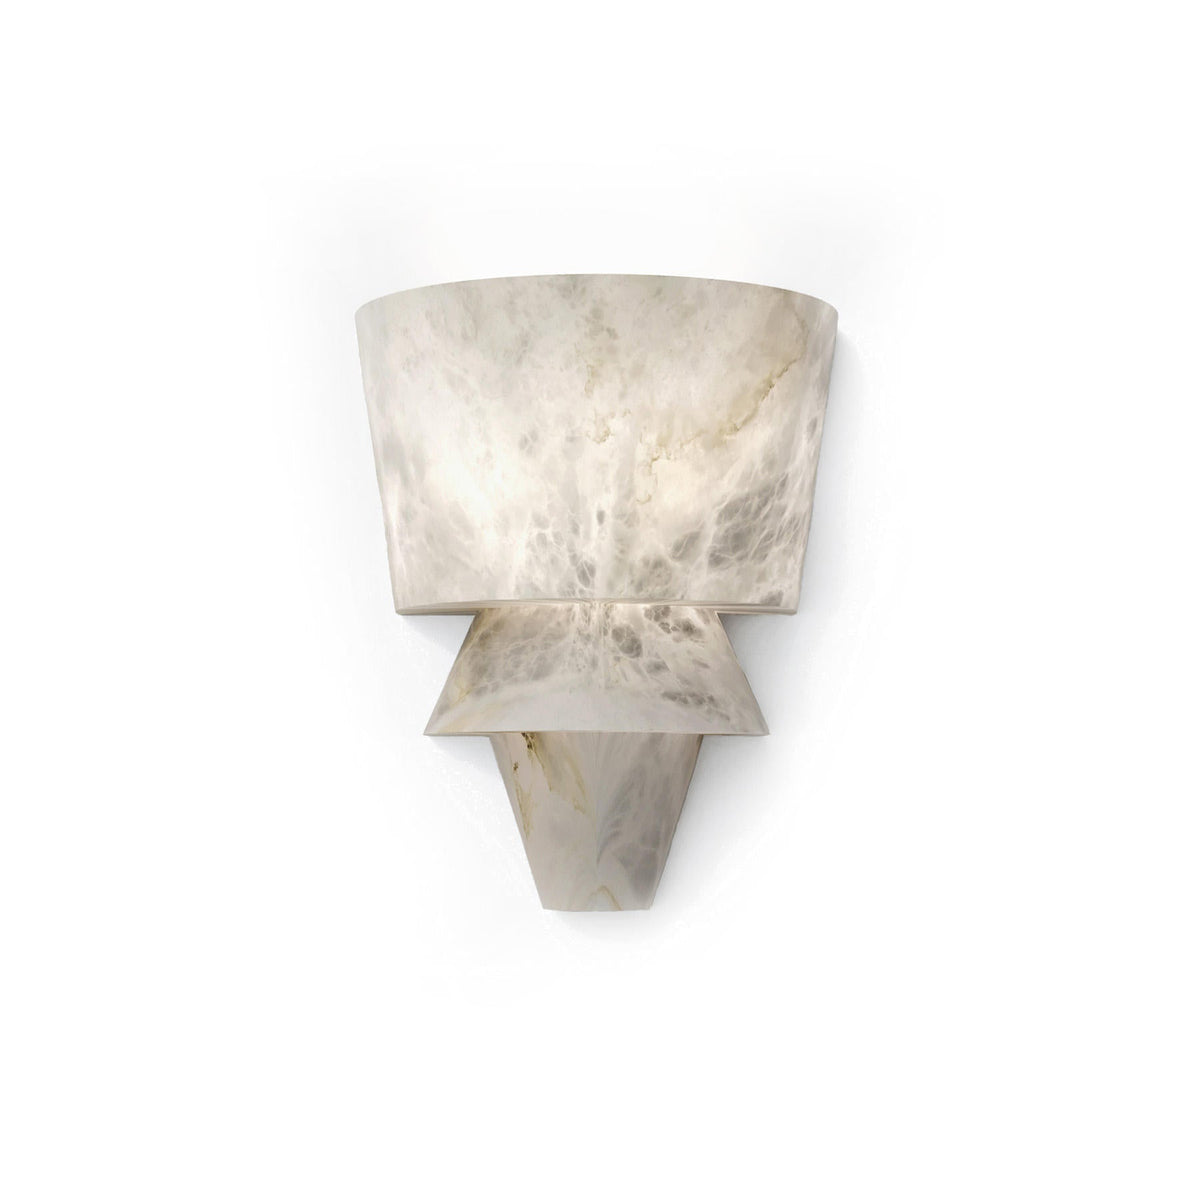 Koltin FLO A Alabaster Wall Sconce, Wall Lamp For Bedroom, Living Room Wall Light Fixtures J-CHANDELIER   